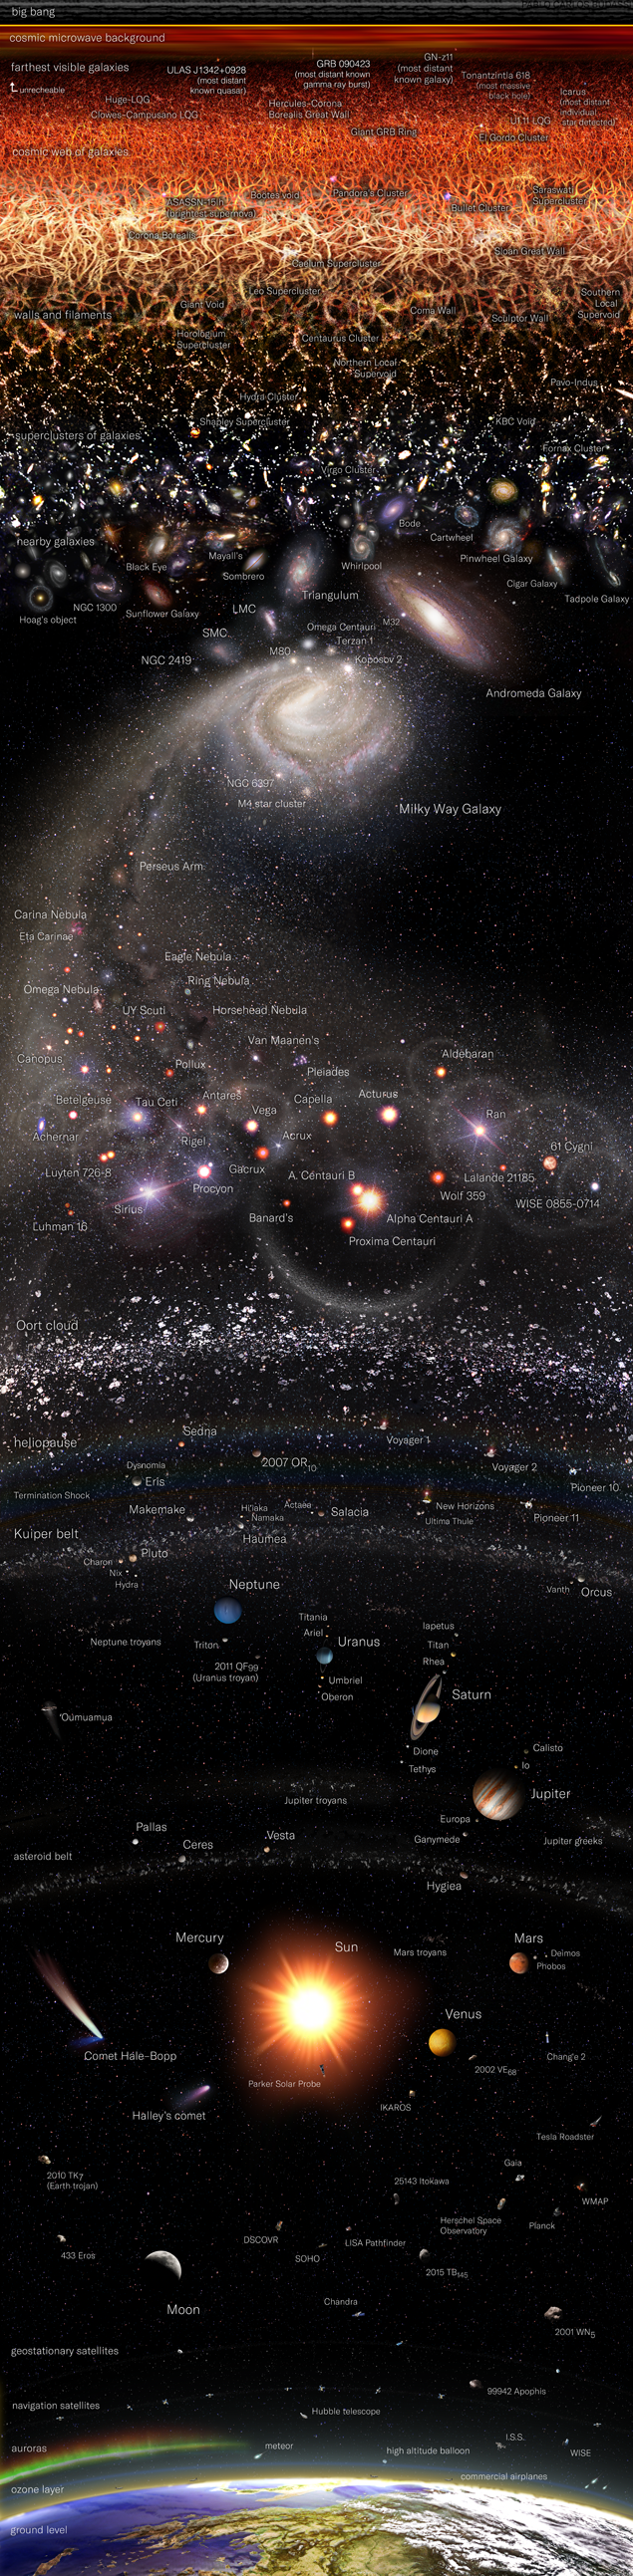 Observable_Universe_Logarithmic_Map_(vertical_layout_english_annotations)_for_wikipedia_635_x_2586.png